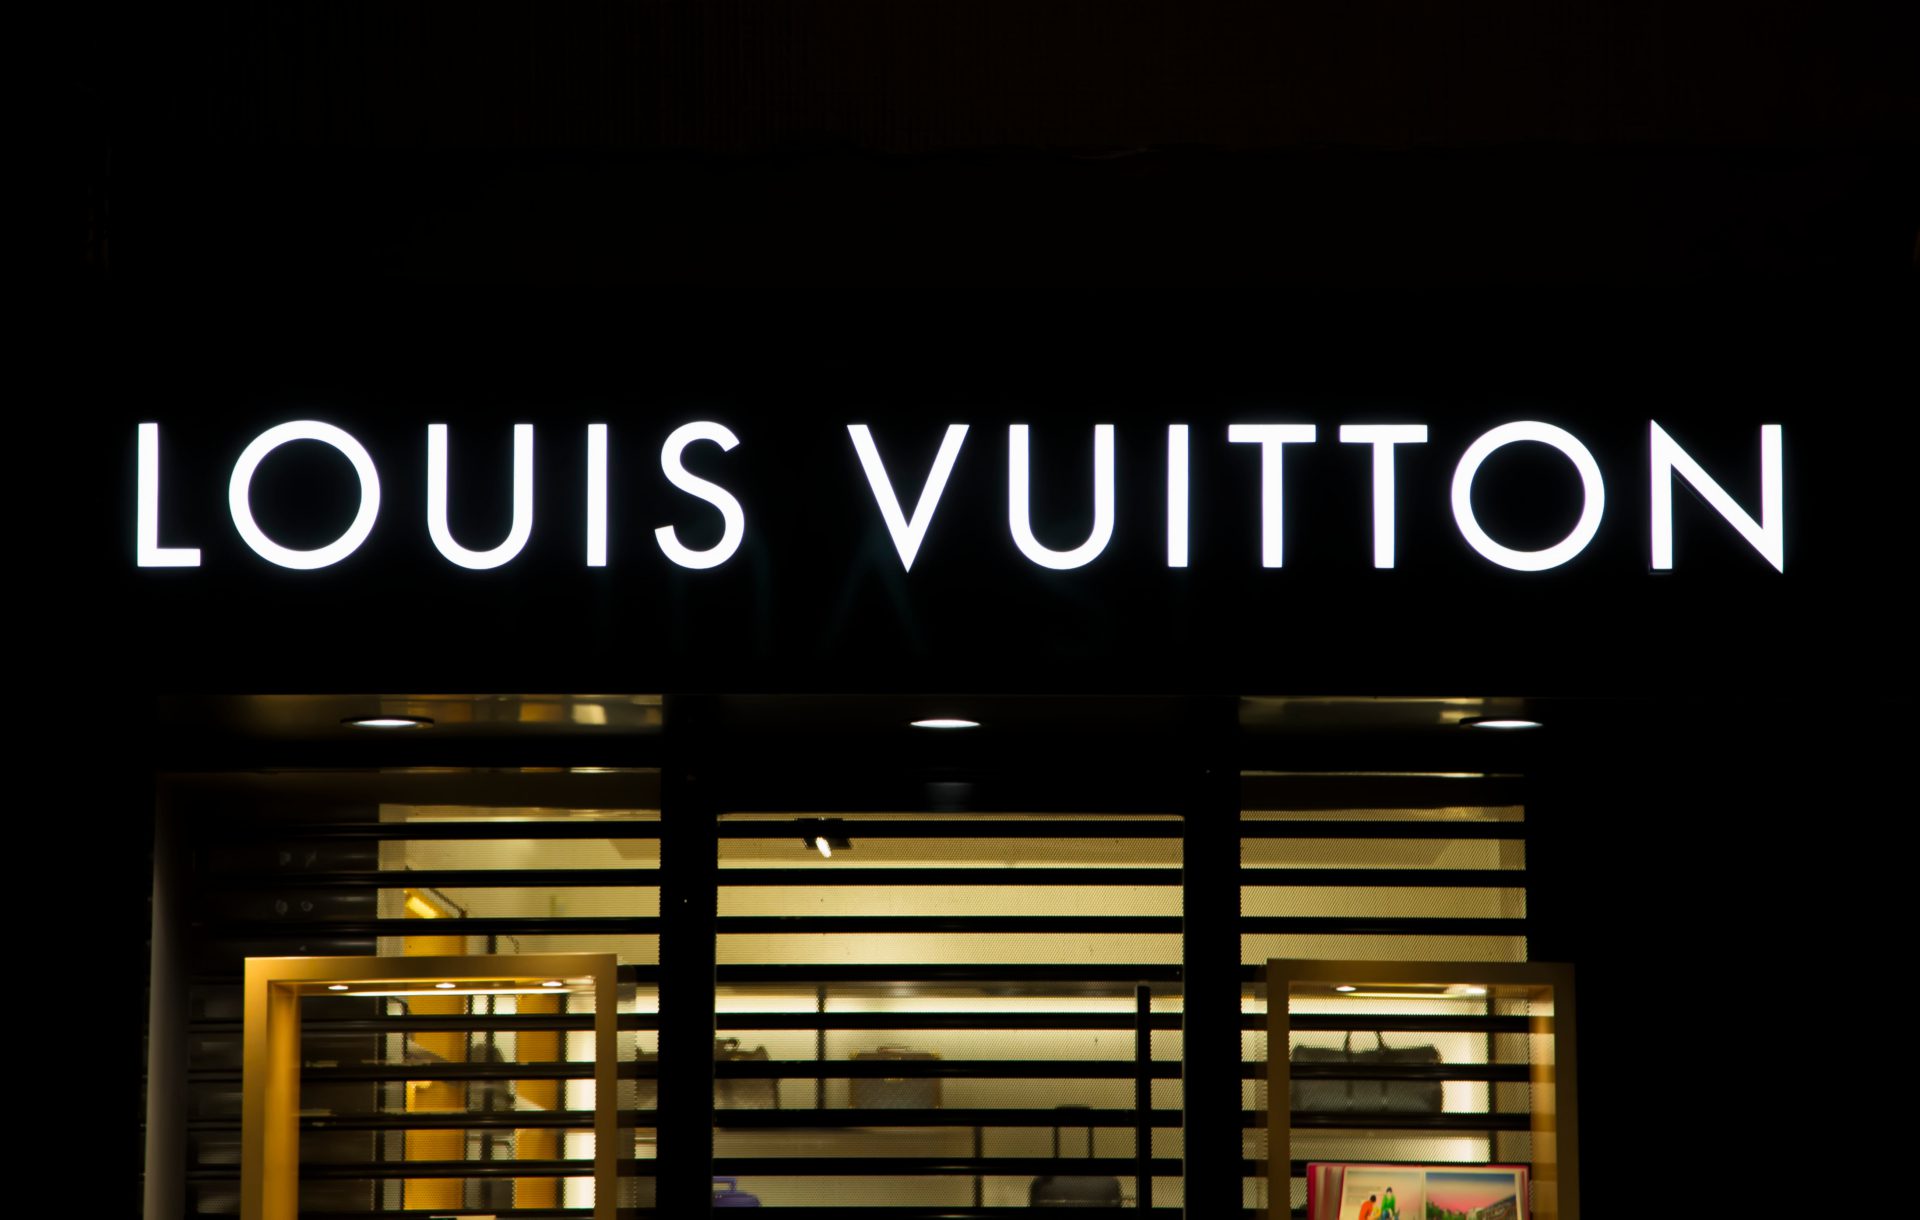 Louis Vuitton wants to sell $41,000 of NFTs to customers